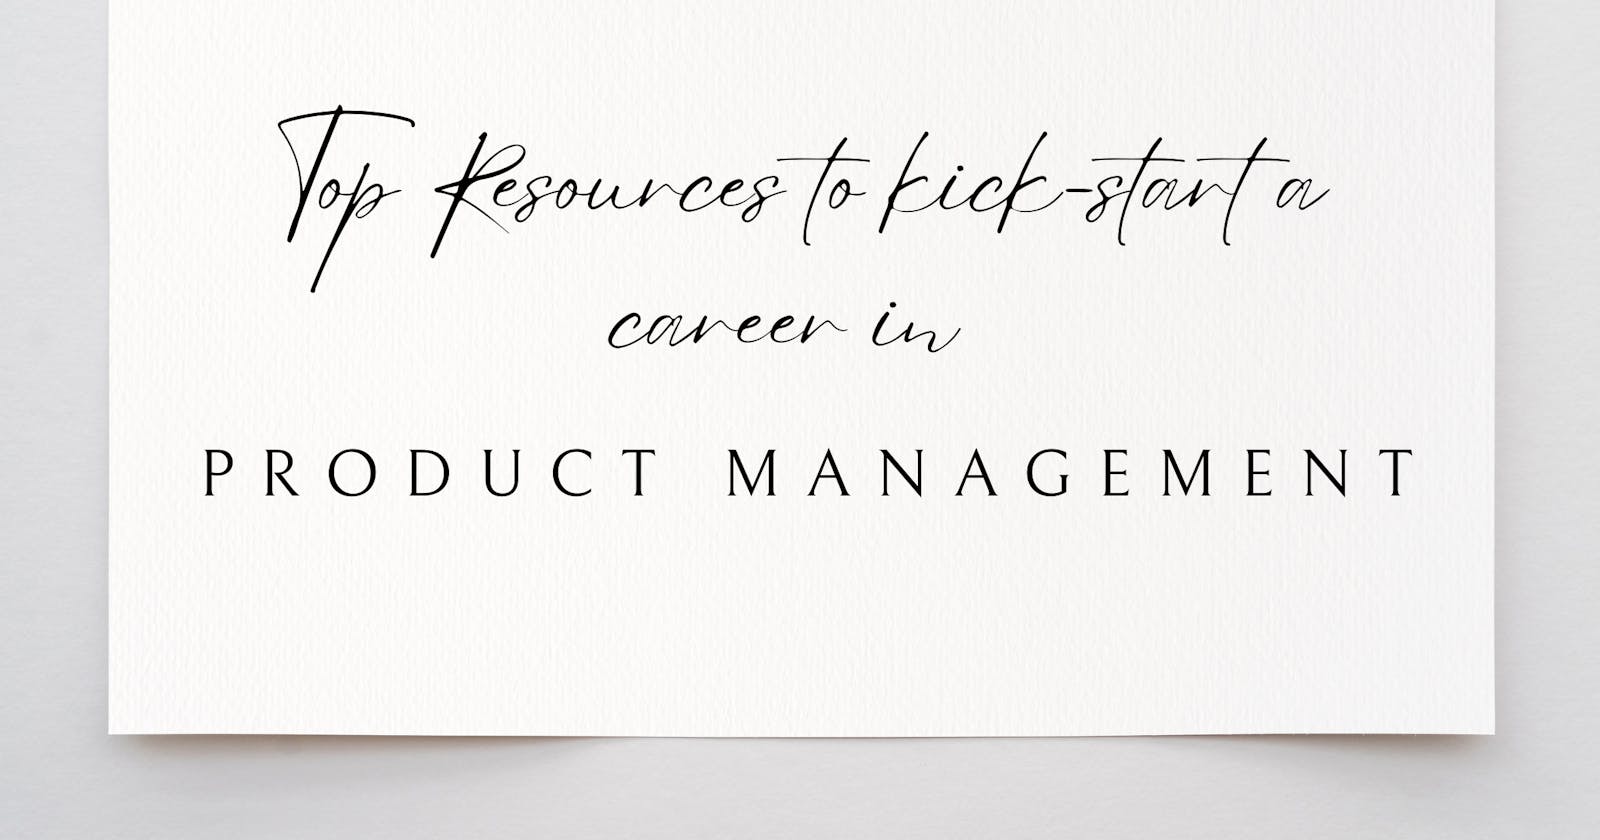 Top Resources to kick-start a career in Product Management